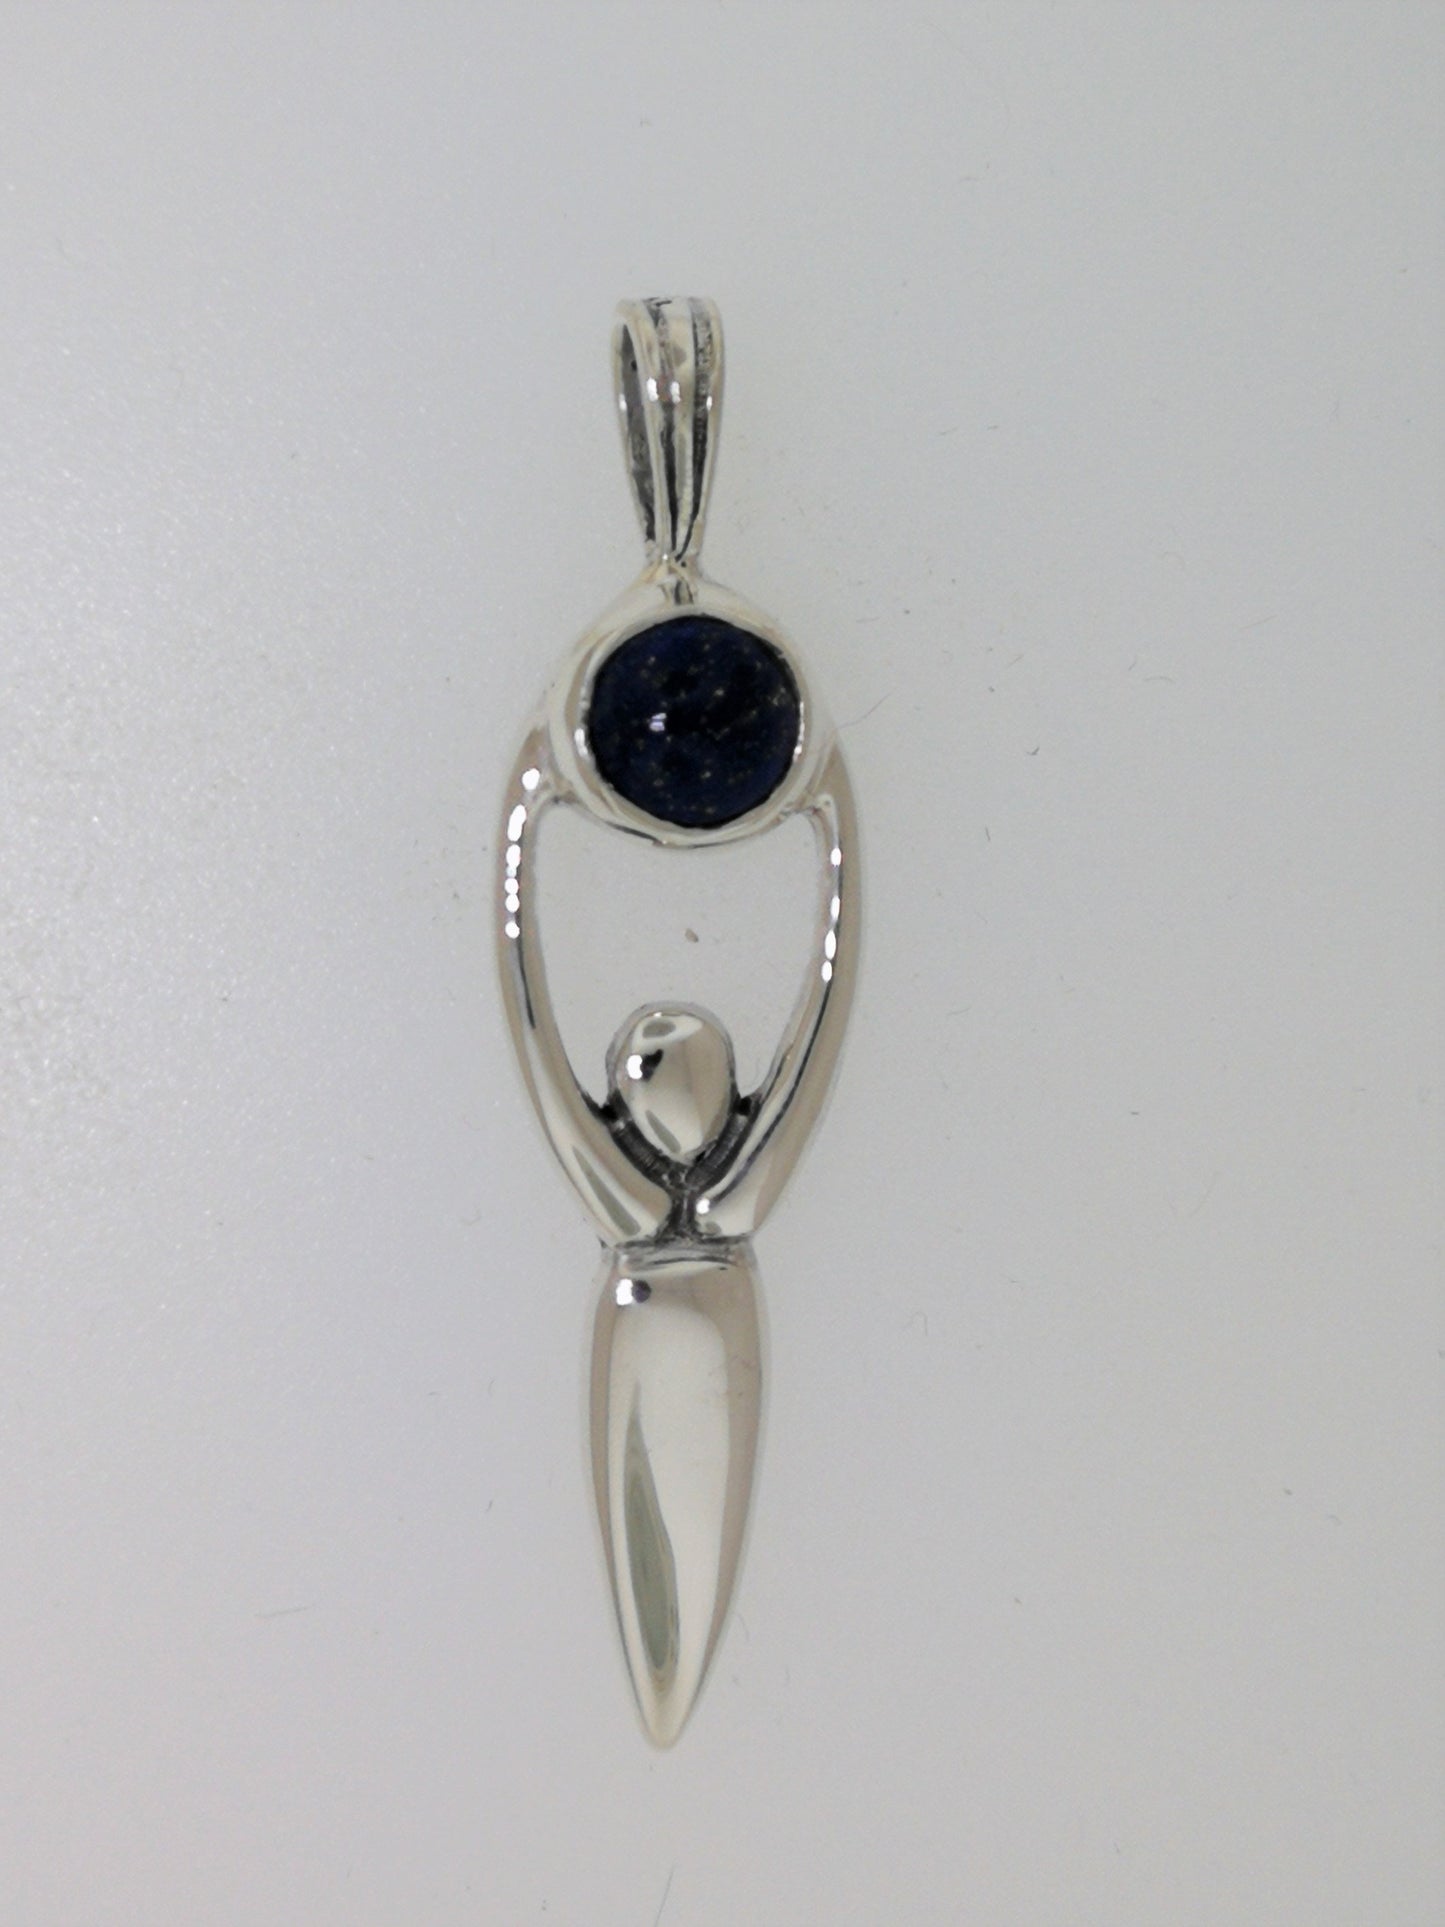 Sterling Silver Lunar Goddess Pendant with Gemstone Moon, Silver Wiccan Pendant, Gemstone Pagan Pendant, Silver Goddess Pendant, Silver Moon Goddess, Sterling Silver Goddess Pendant, Primal Goddess Pendant, Silver Lunar Goddess, Silver Gemstone Goddess, Goddess Pendant In Stilver, Silver Fertility Pendant, Silver Fertility Goddess